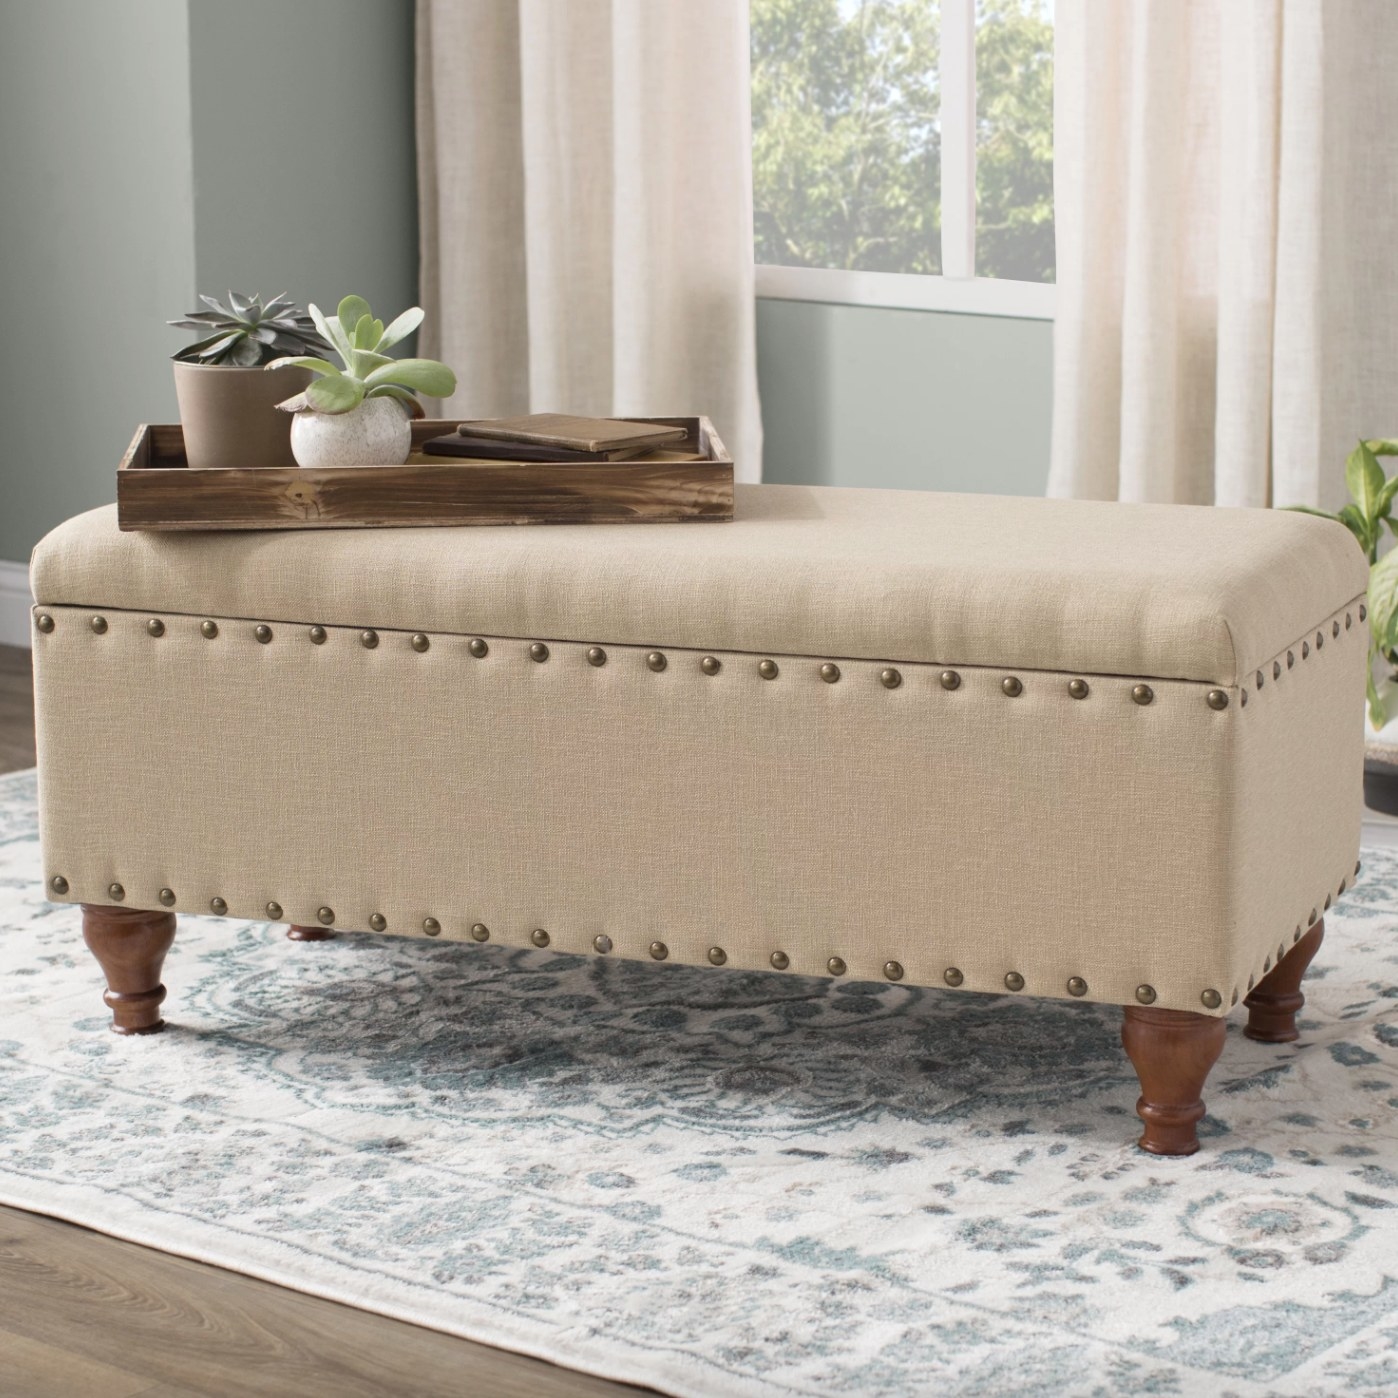 The upholstered flip top storage bench in tan